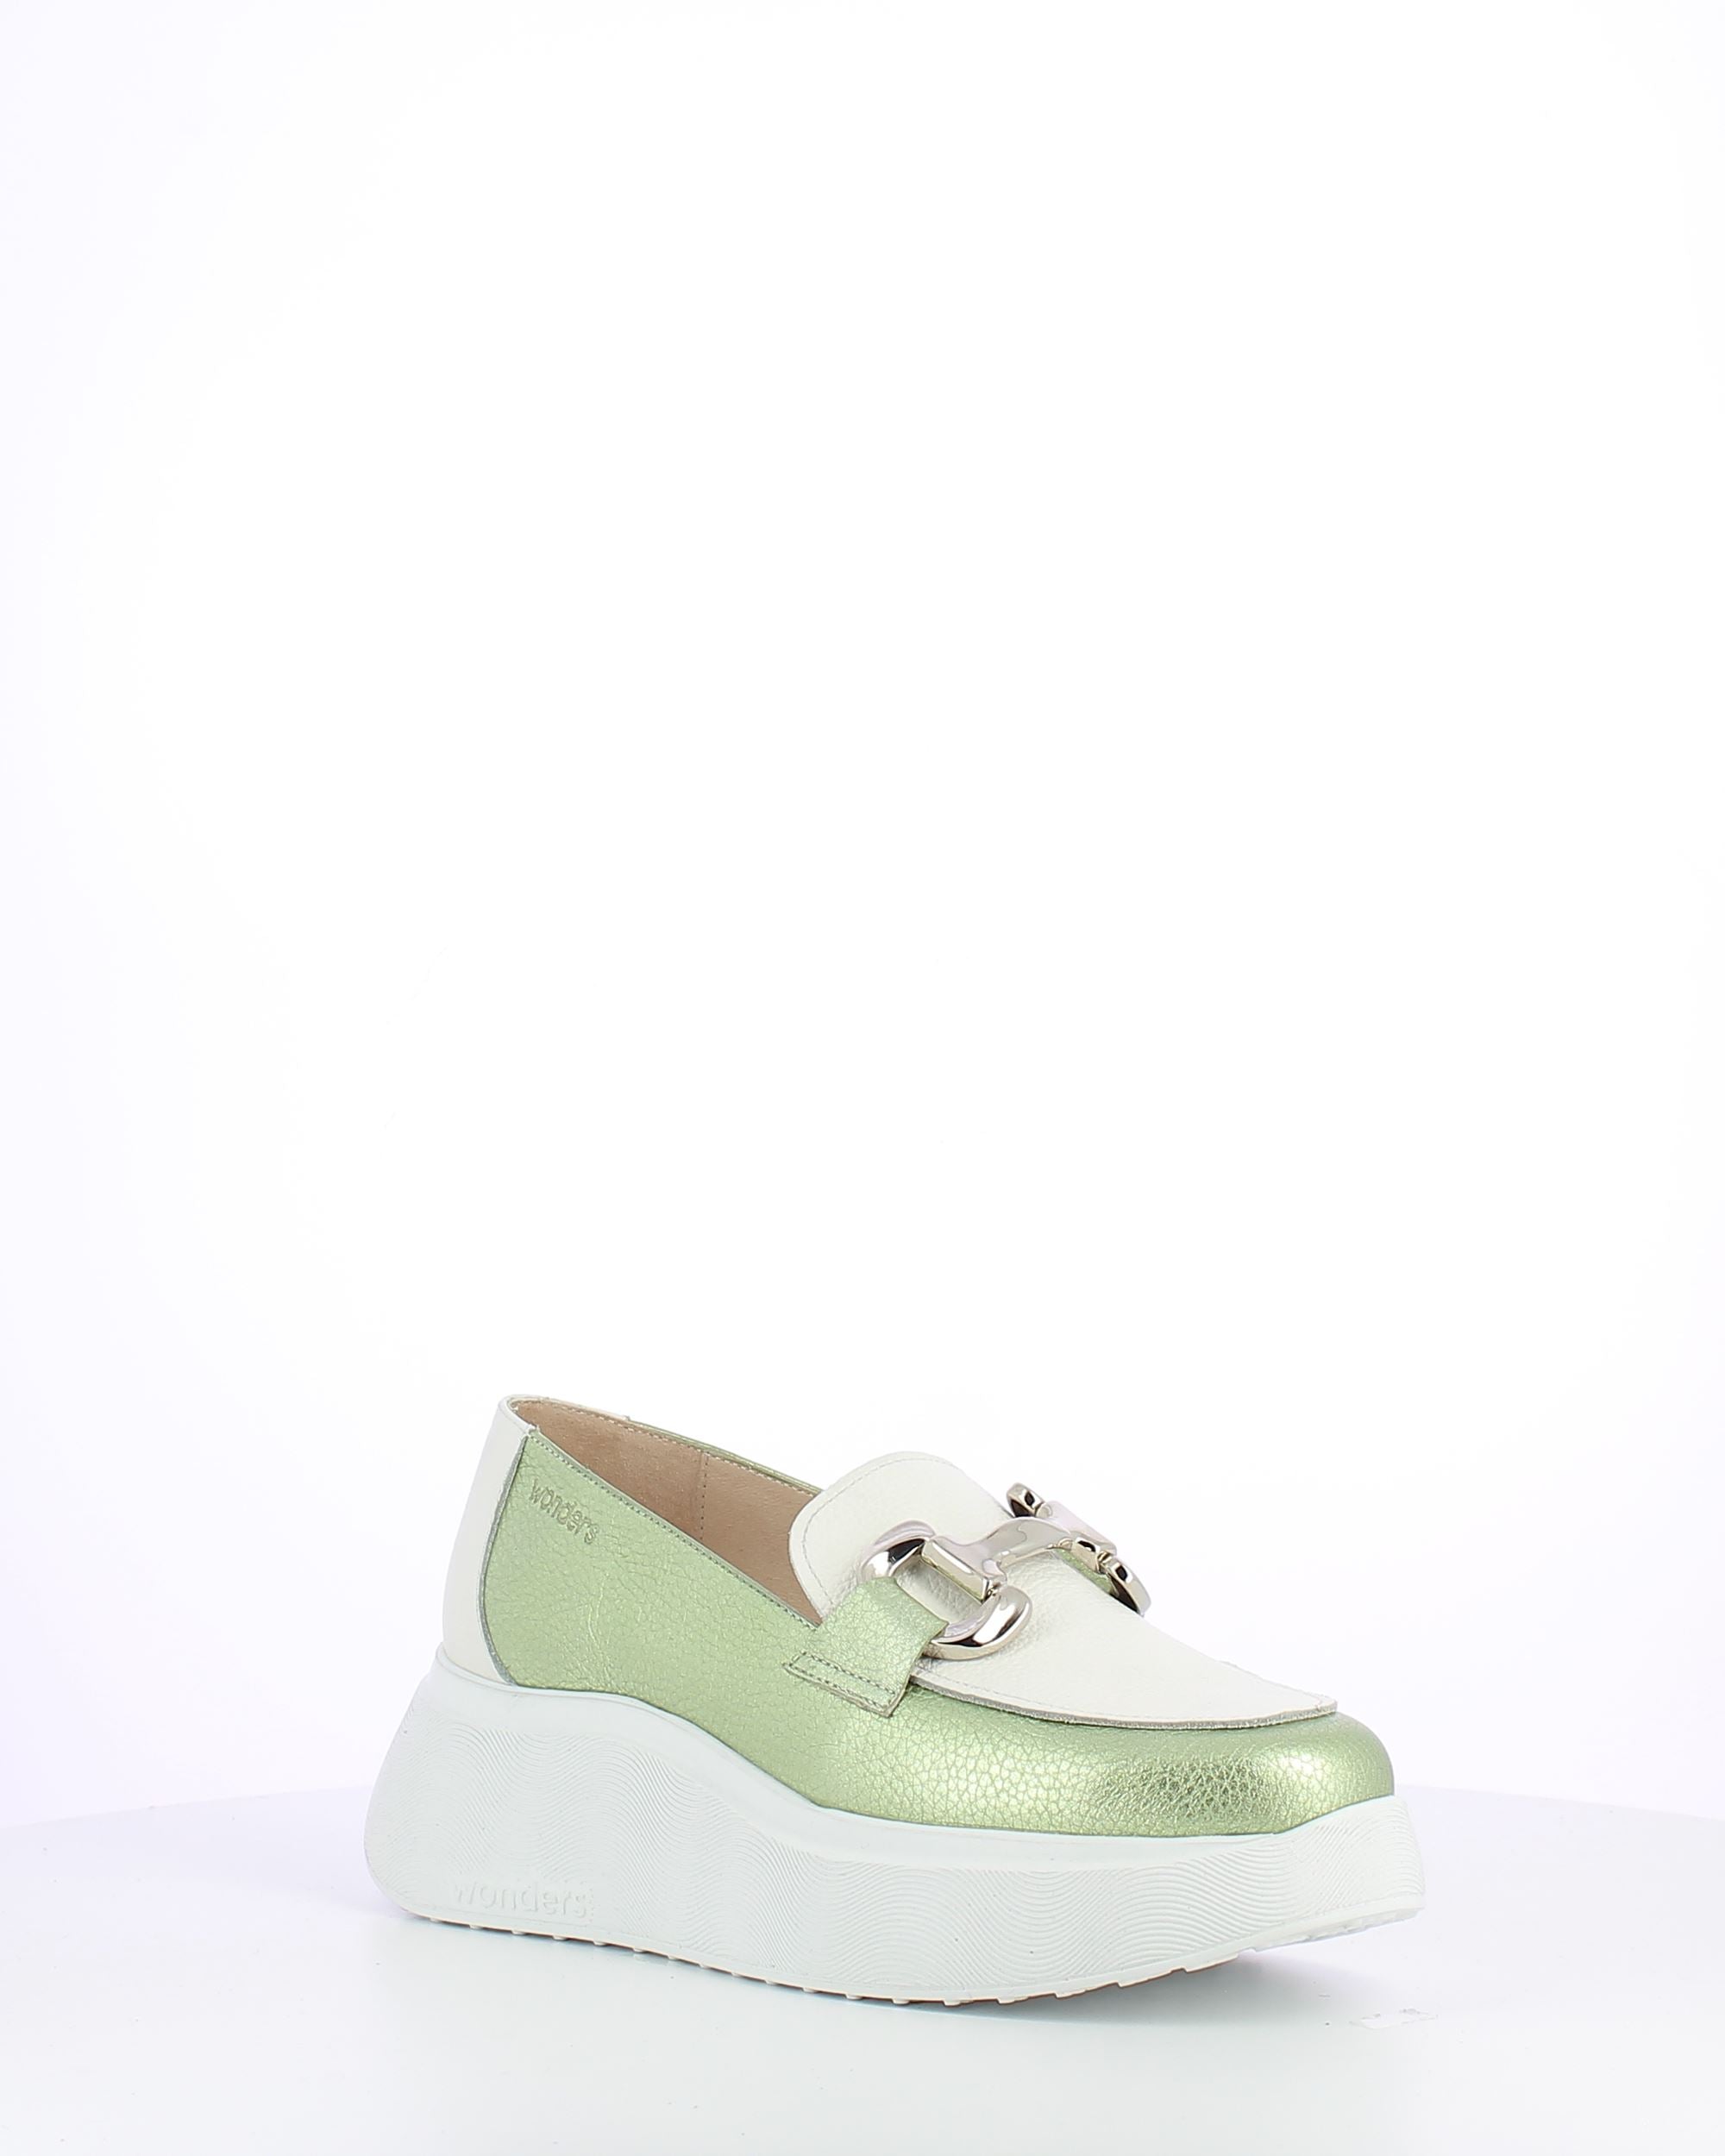 Wonders A-3604 Ladies Spanish Mint Green Leather Slip On Loafers